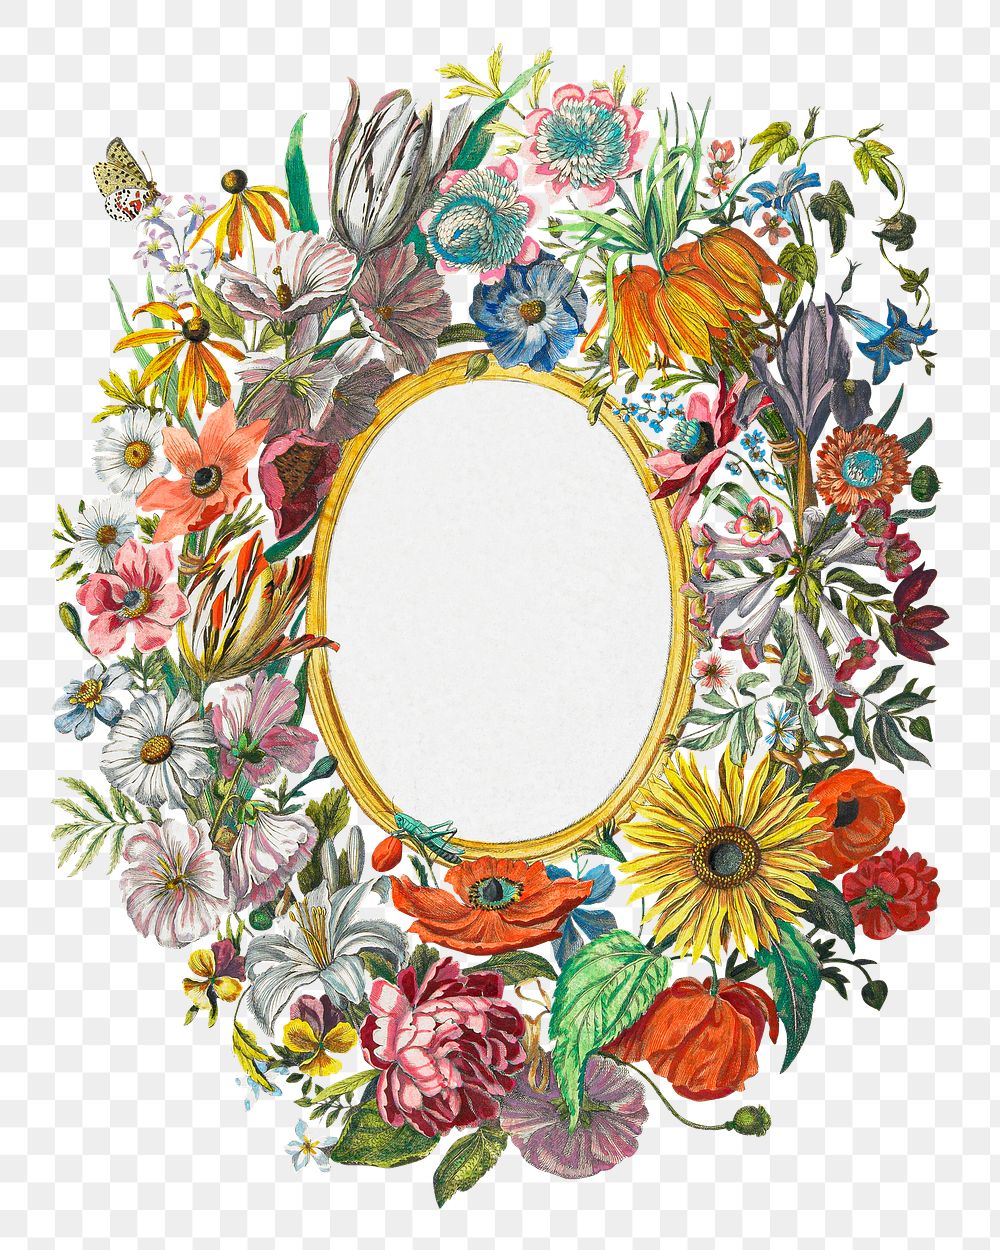 Vintage floral frame png chromolithograph art, transparent background. Remixed by rawpixel. 